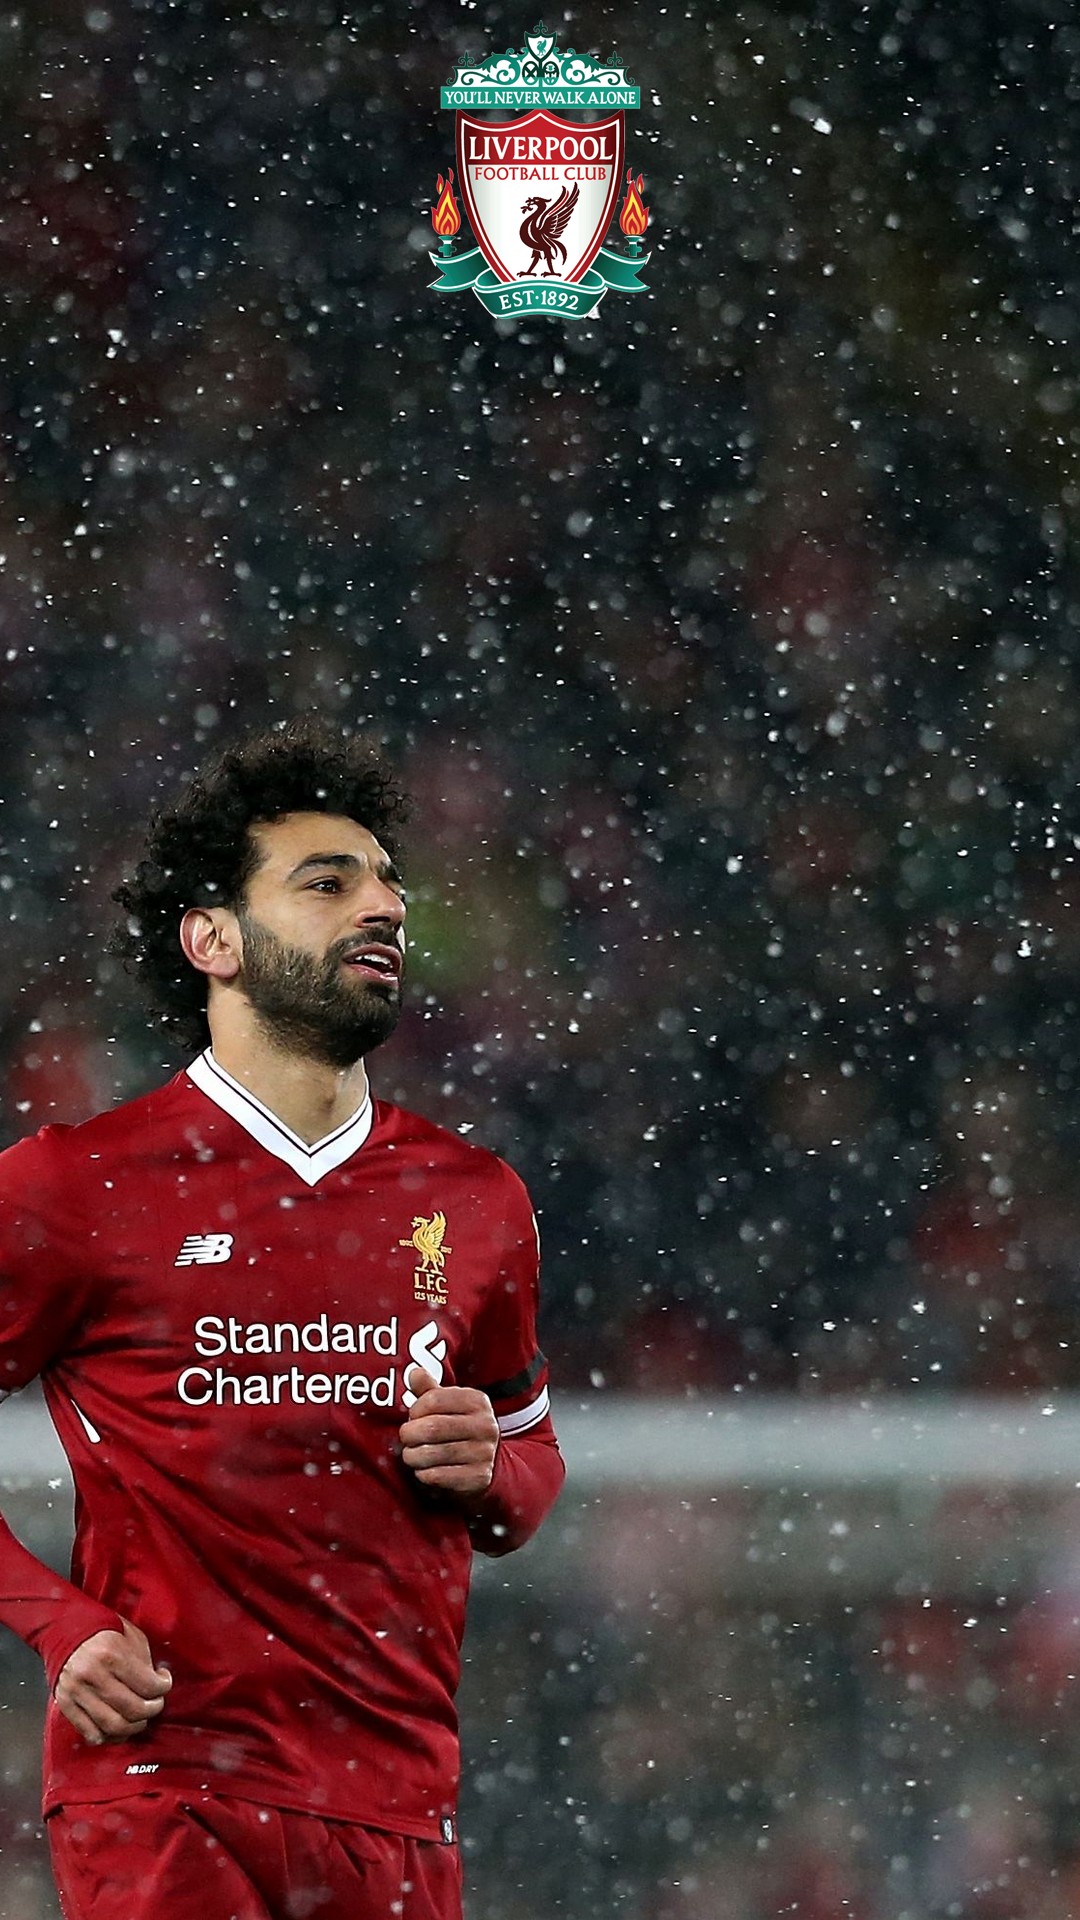 Mo Salah Wallpaper For Android with image resolution 1080x1920 pixel. You can make this wallpaper for your Android backgrounds, Tablet, Smartphones Screensavers and Mobile Phone Lock Screen